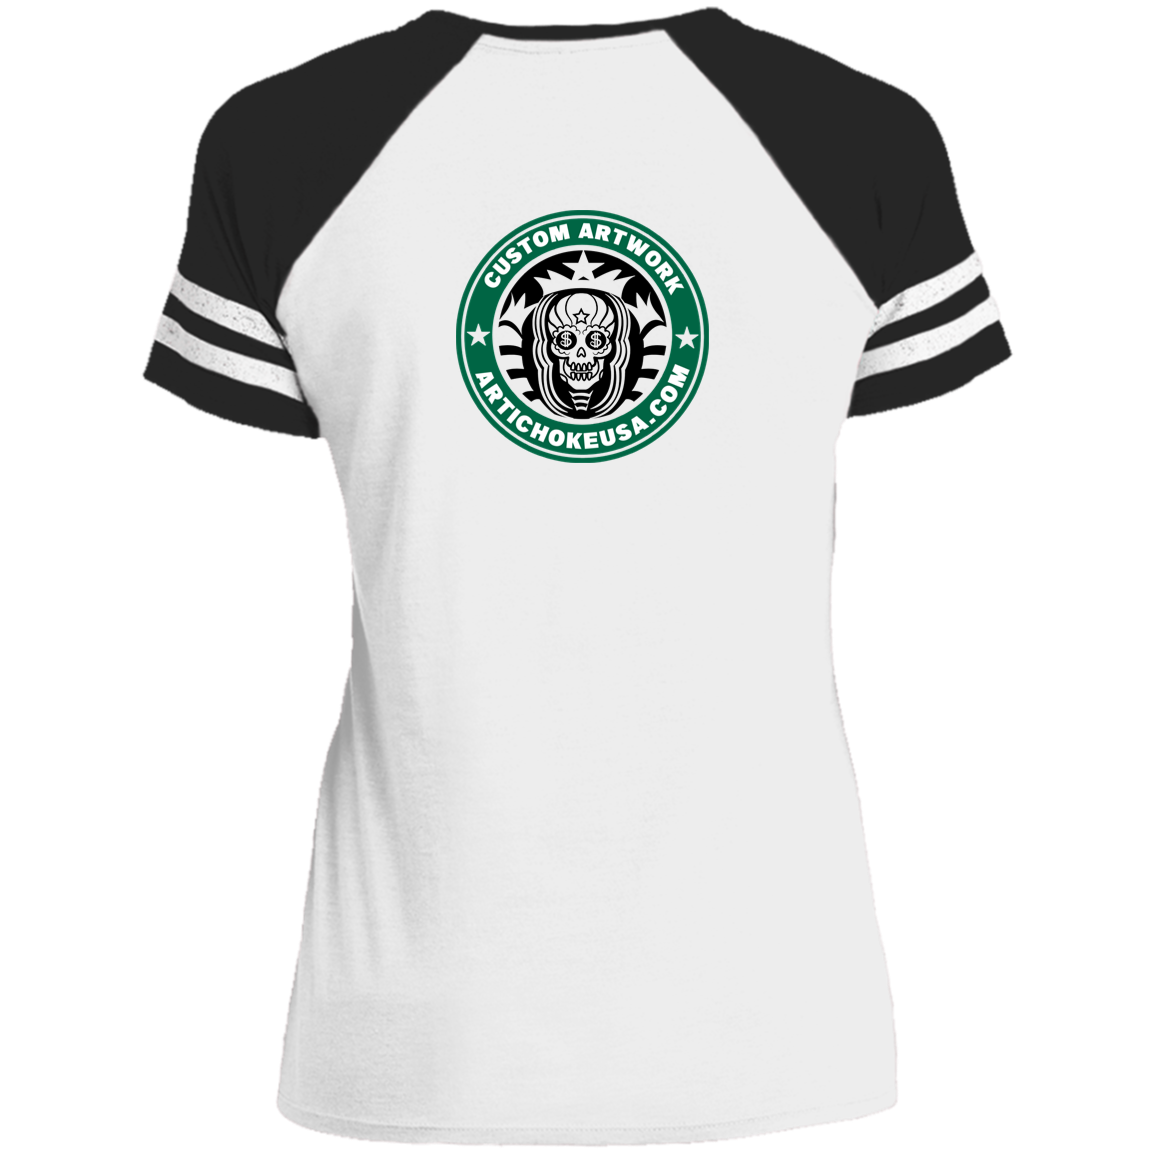 ArtichokeUSA Custom Design. Money Can't Buy Happiness But It Can Buy You Coffee. Ladies' Game V-Neck T-Shirt